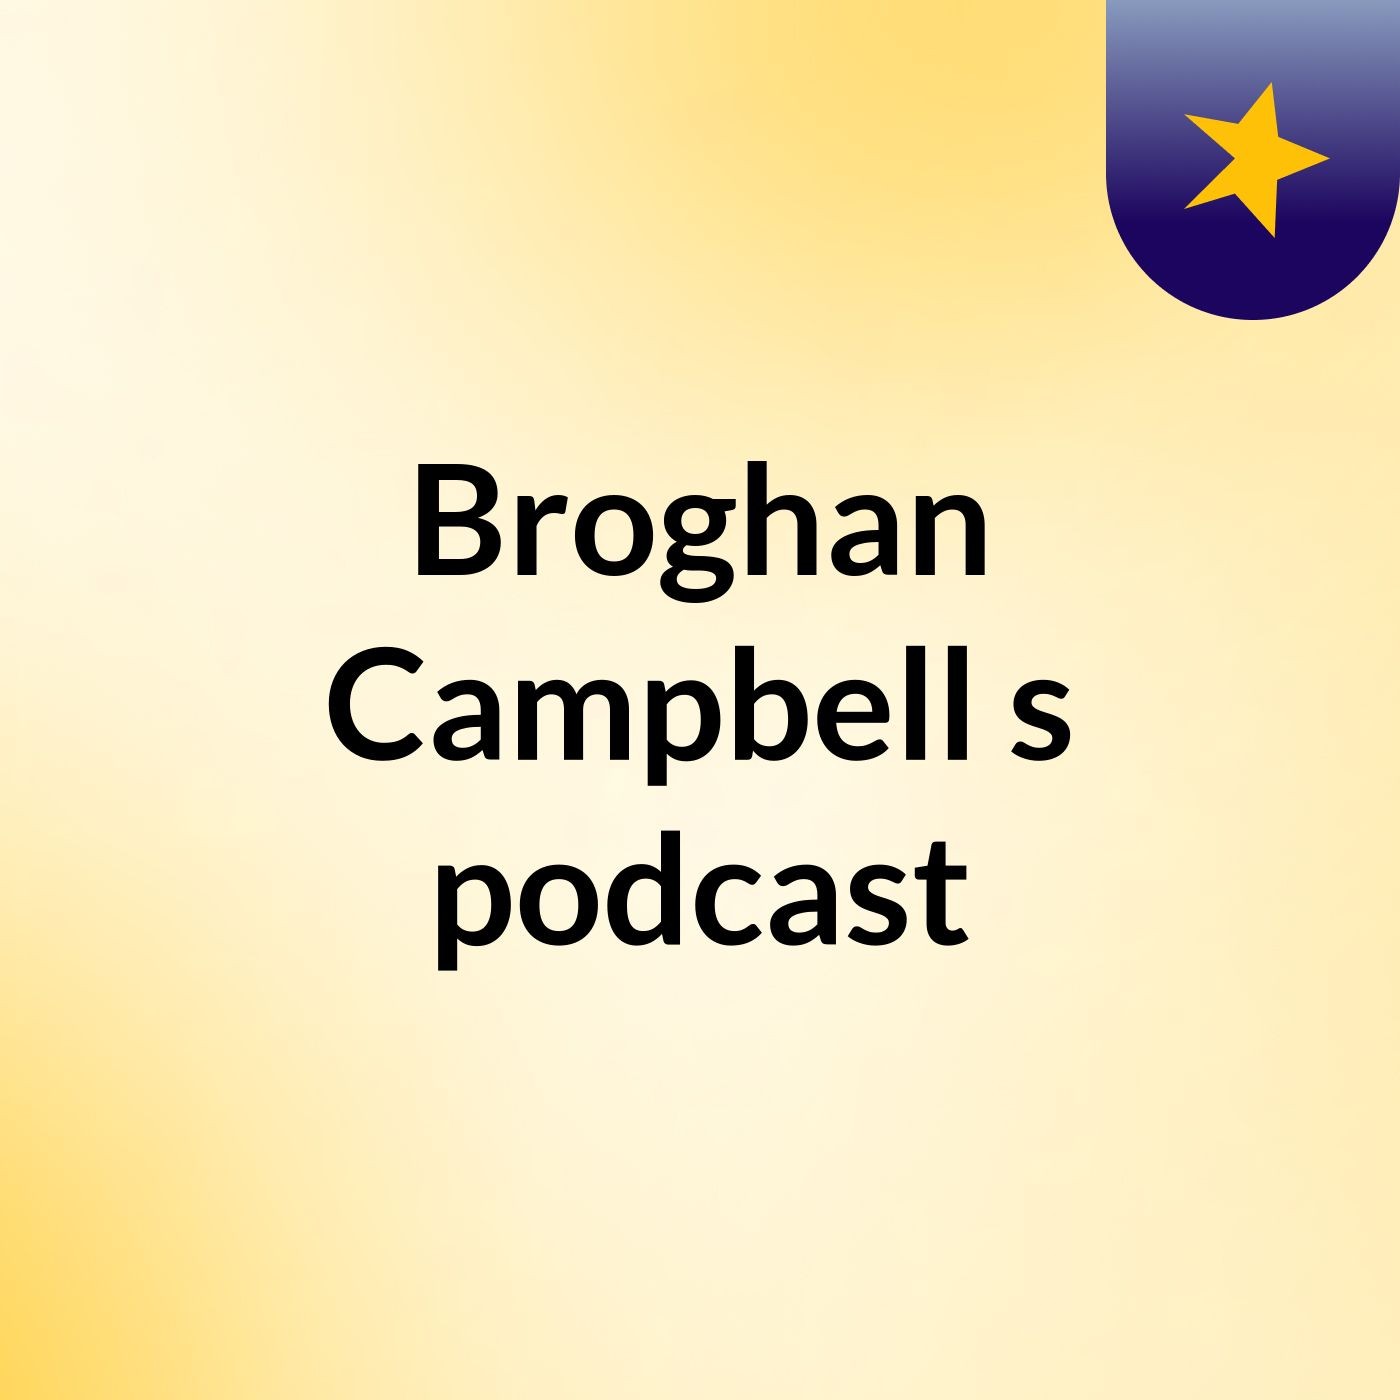 Broghan Campbell's podcast